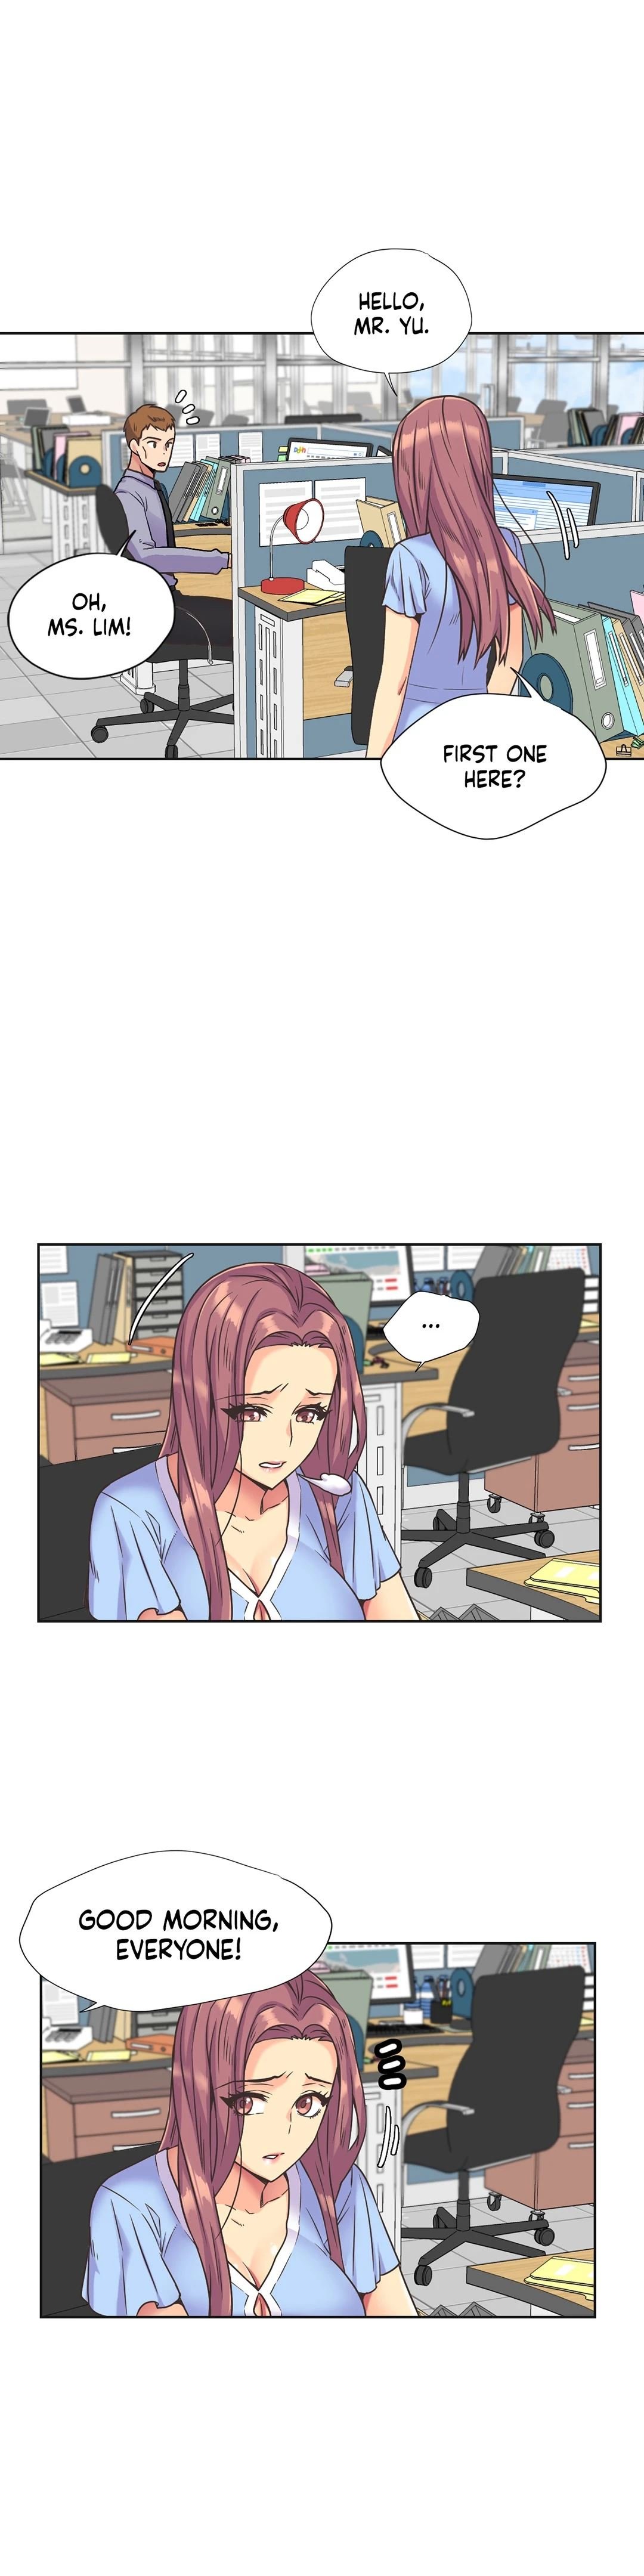 the-yes-girl-chap-35-19